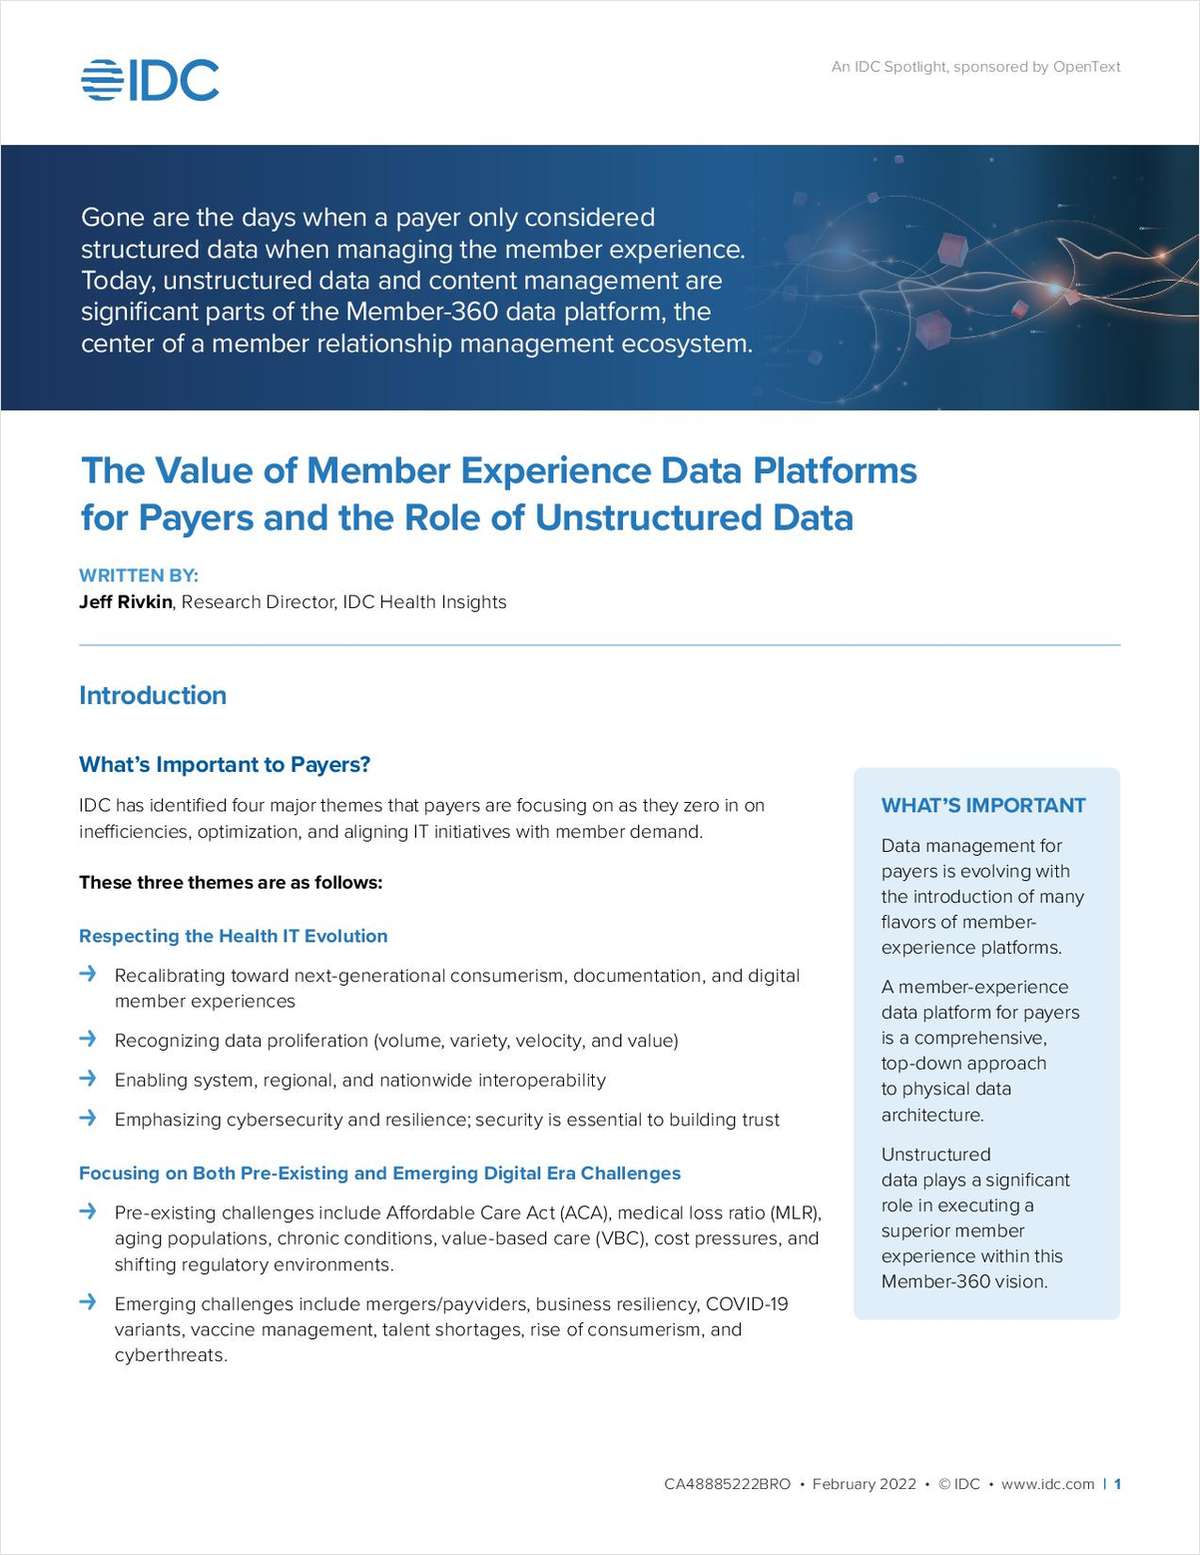 The Value of Member Experience Data Platforms for Payers and the Role of Unstructured Data